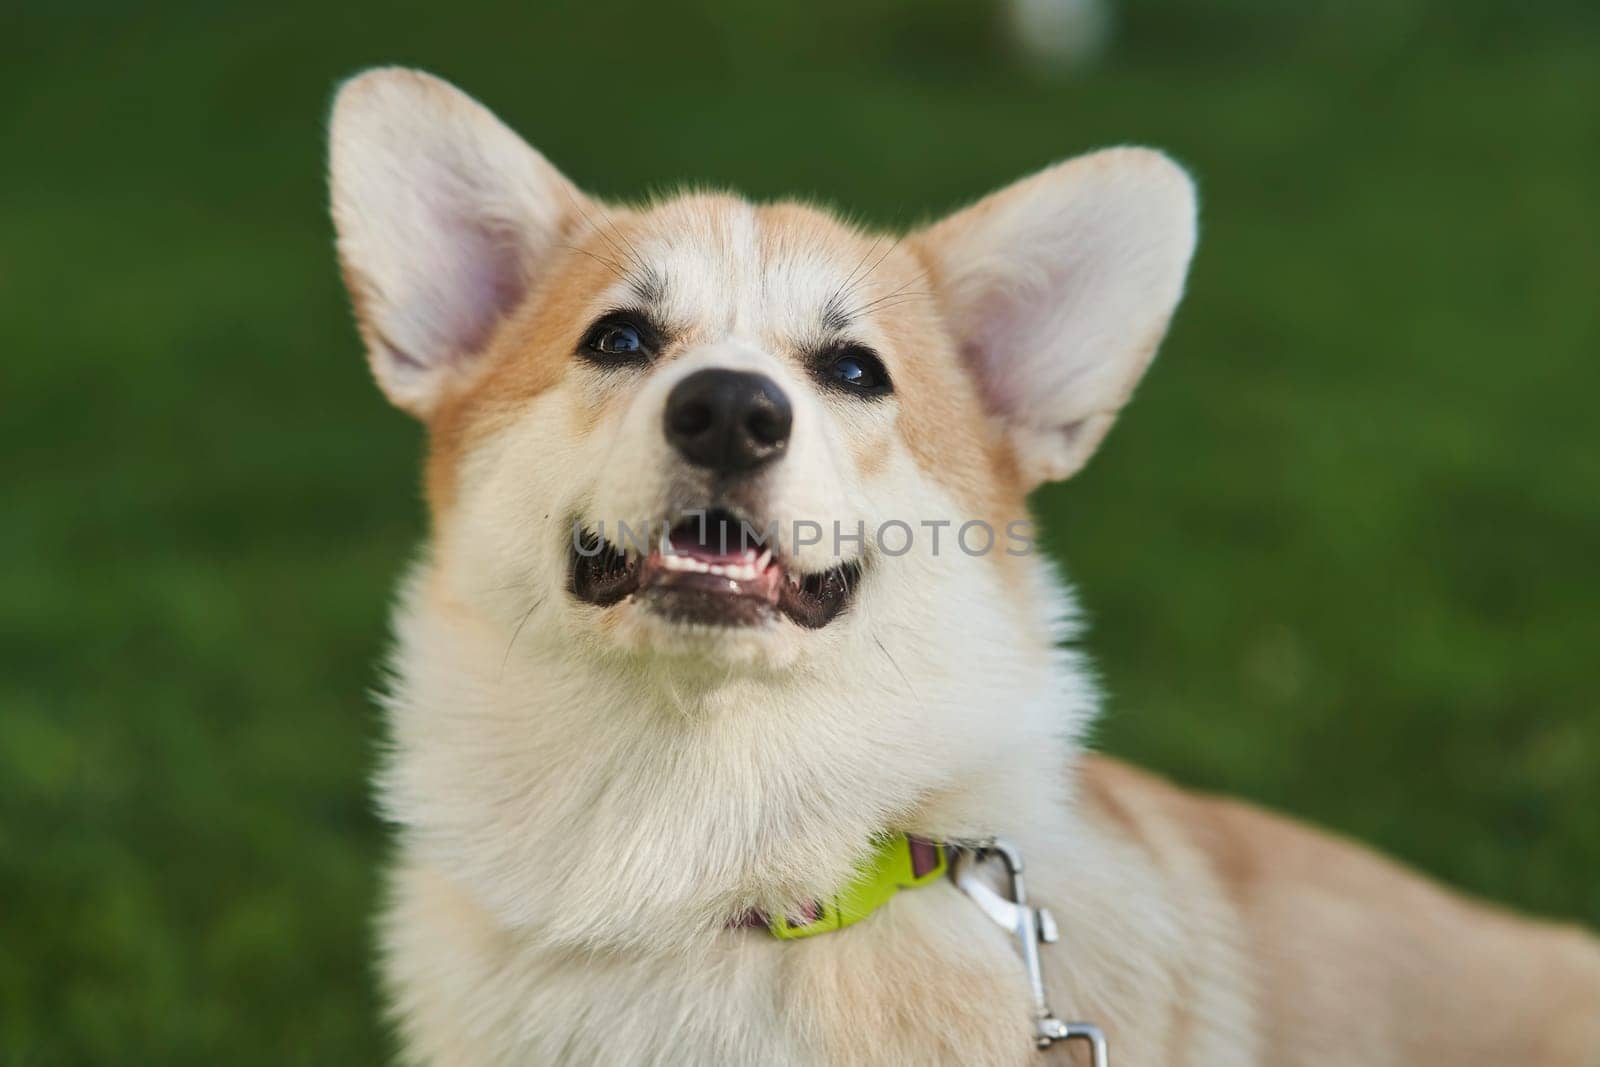 close up portrait of happy Welsh Corgi Pembroke dog smiling in a park in summer. High quality photo